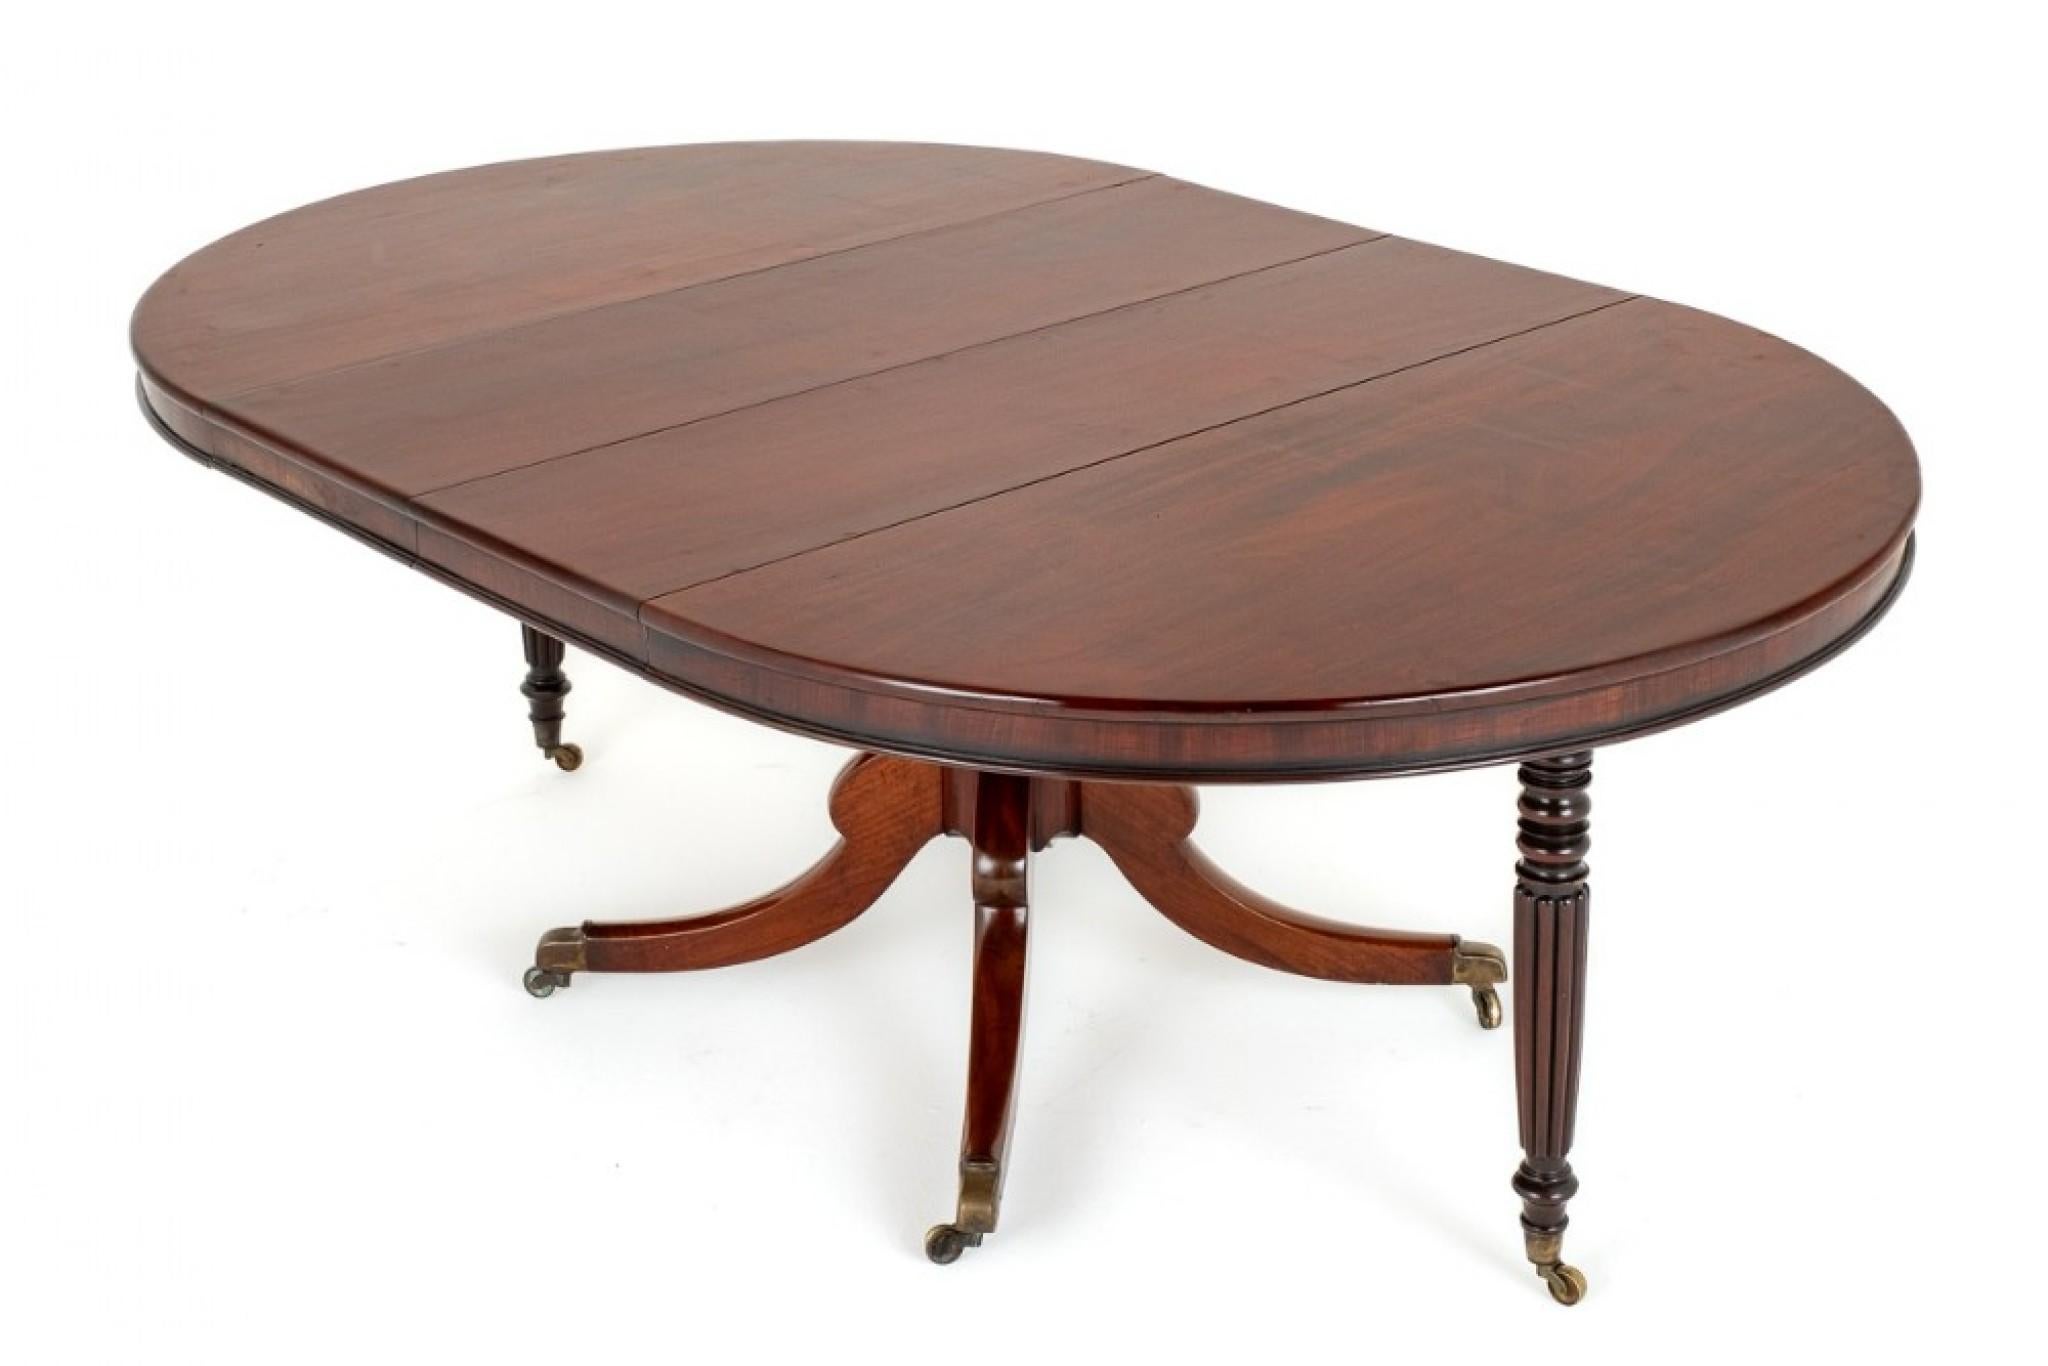 Regency Mahogany Circular Extending Dining Table.
Period Regency
This Quality Table is Raised upon a Typical Regency Base
Comprising of Elegant Swept Legs with Original Castors and a Ring Turned Column.
The Table Extends by way of a Telescopic